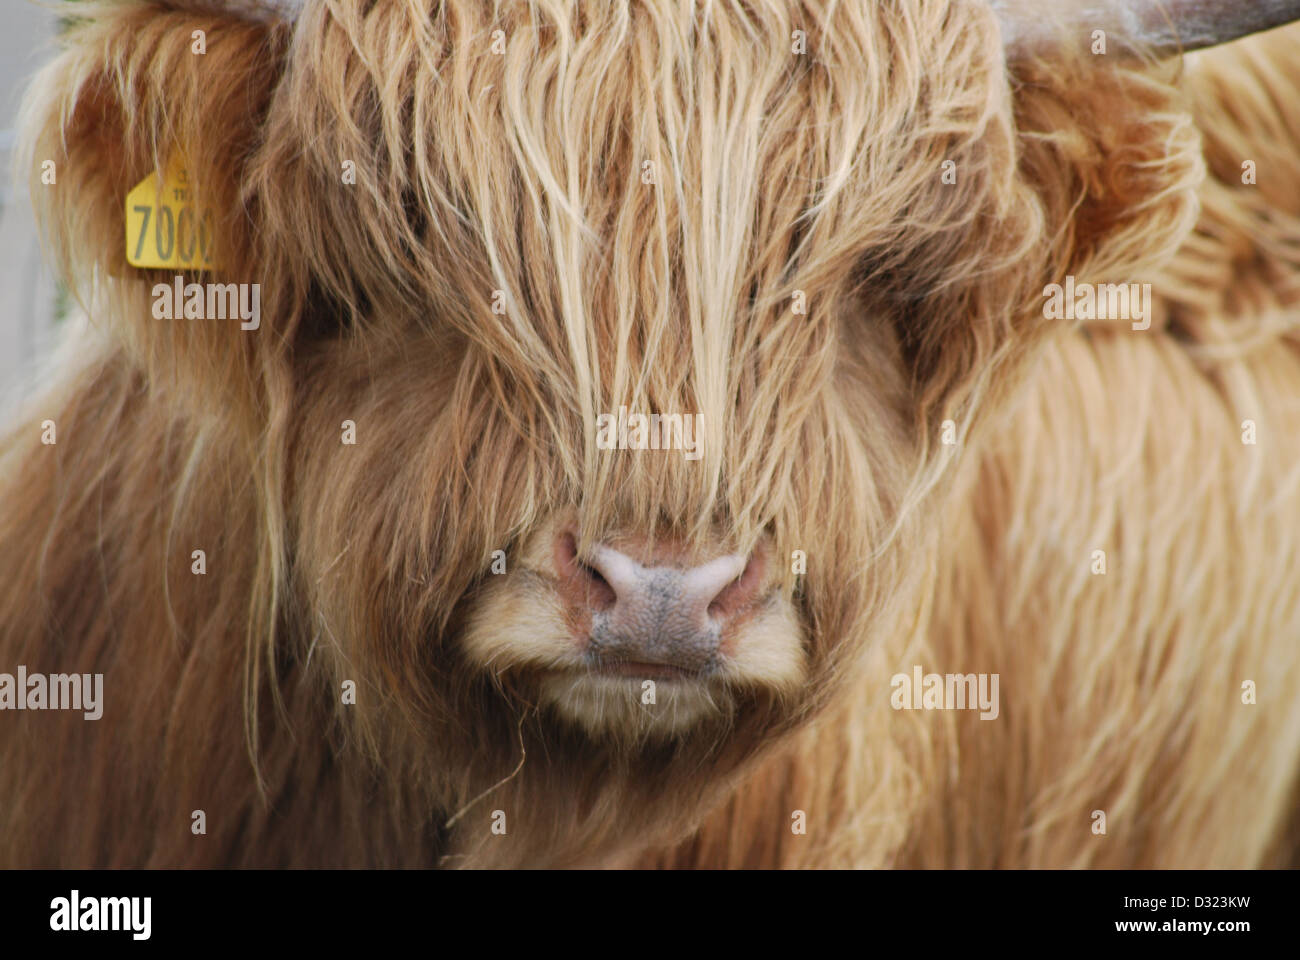 A highland cow with orange or ginger long hair fur at a petting zoo or farm with horns close up of its face and tagged ear Stock Photo